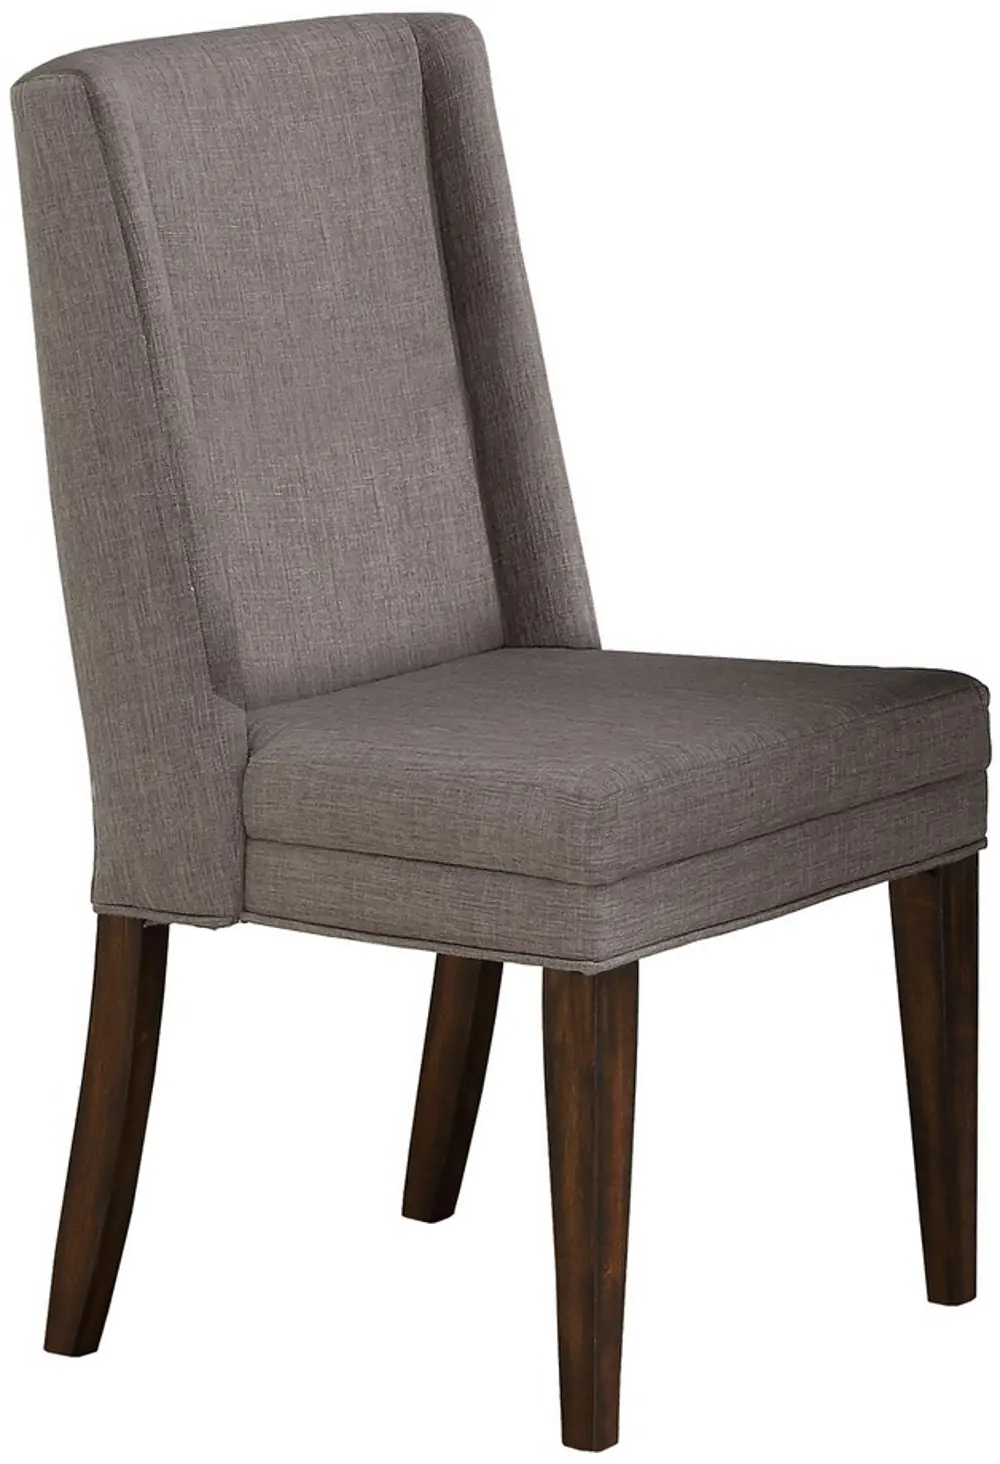 Gray Upholstered Dining Room Chair - Northern Hawk-1